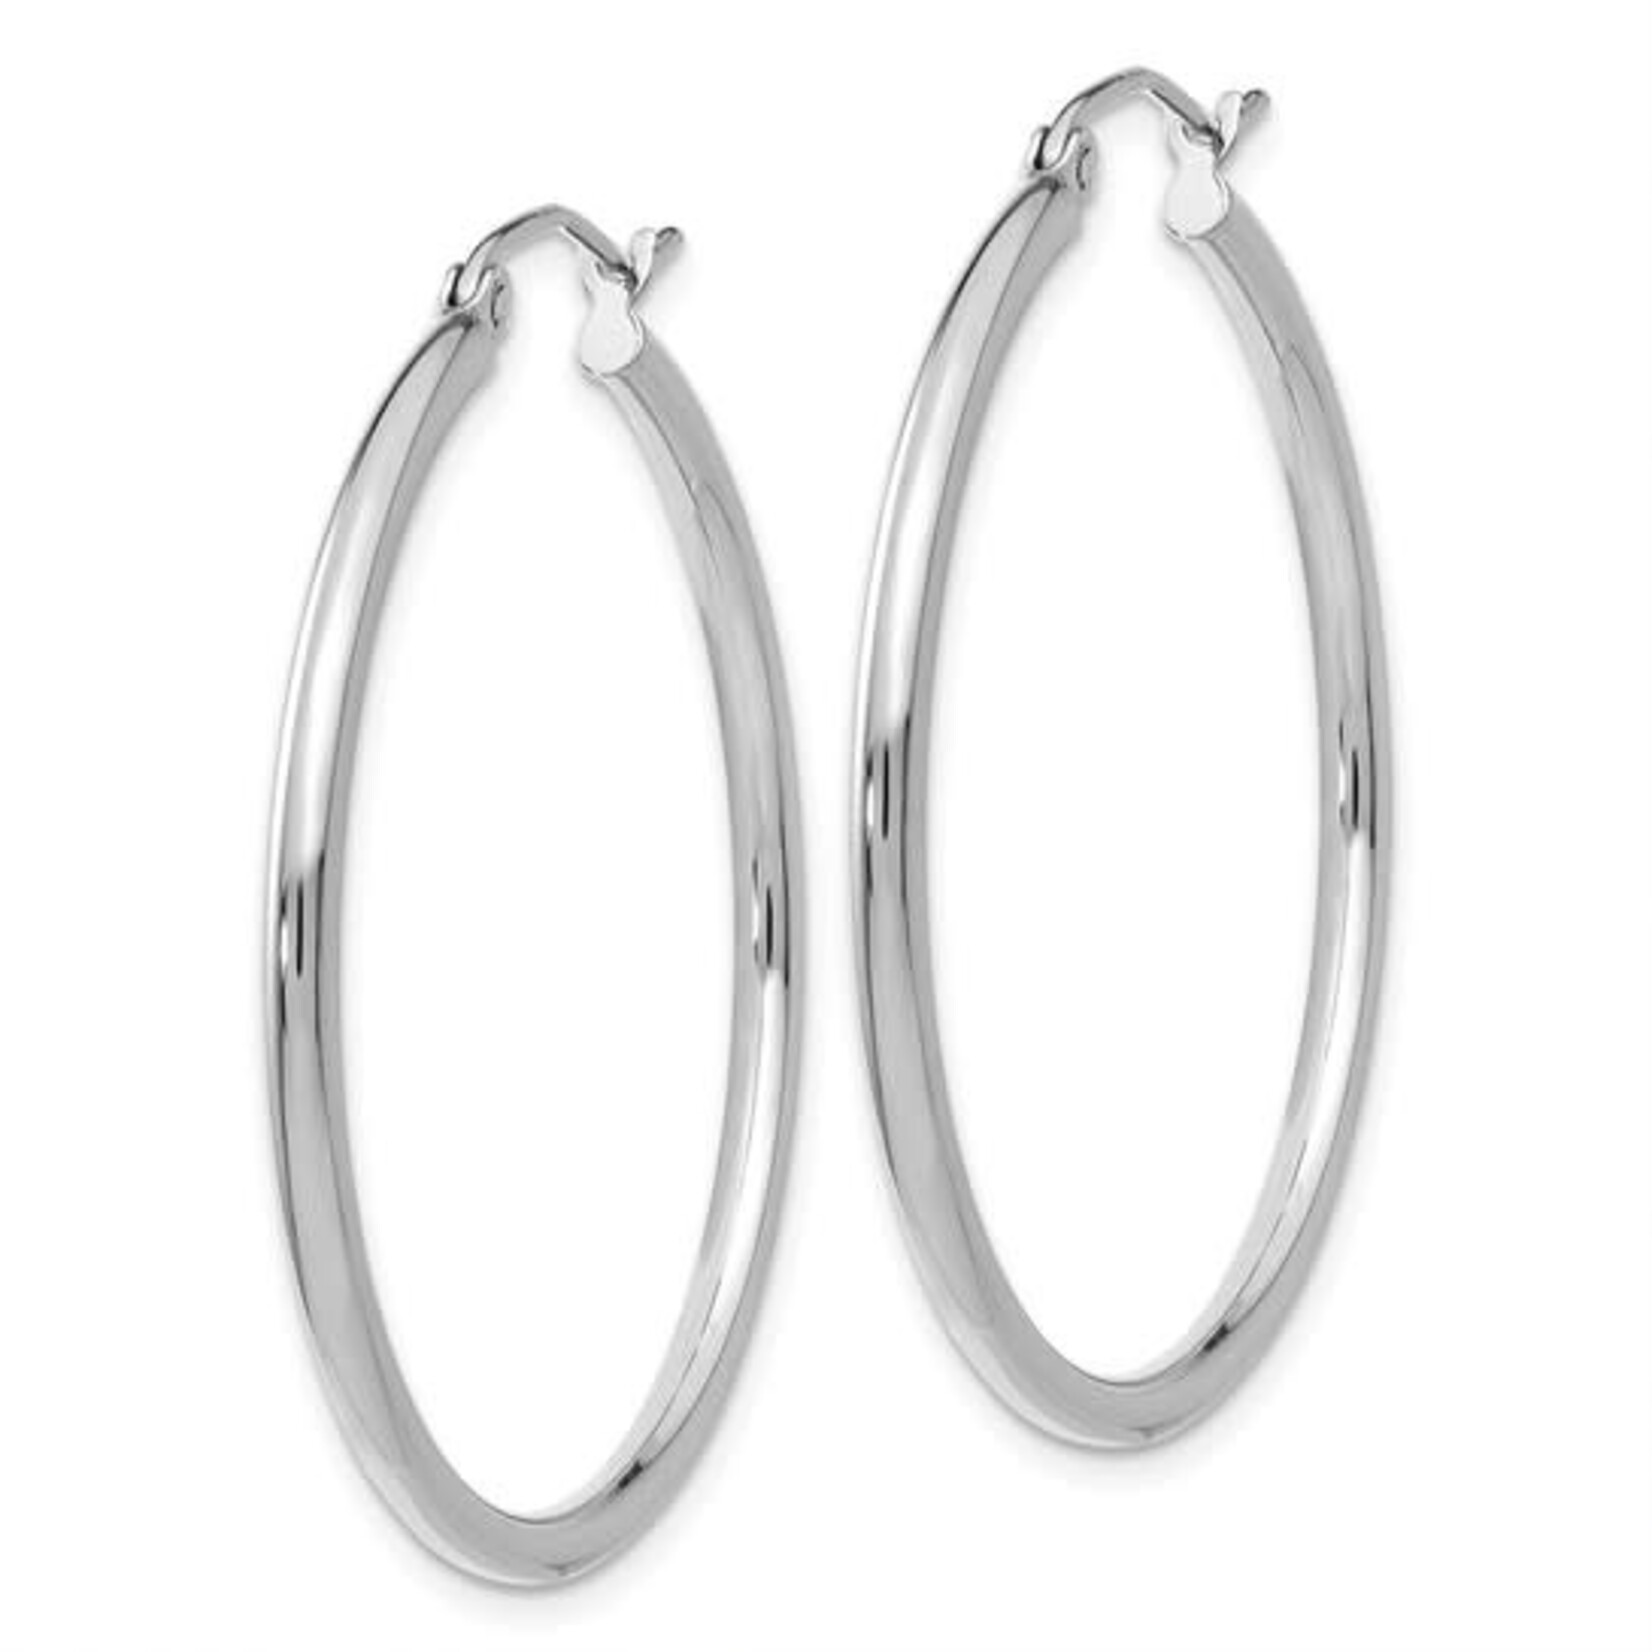 Quality Gold Inc. 14k White Gold Polished 2x35mm Lightweight Tube Hoop Earrings